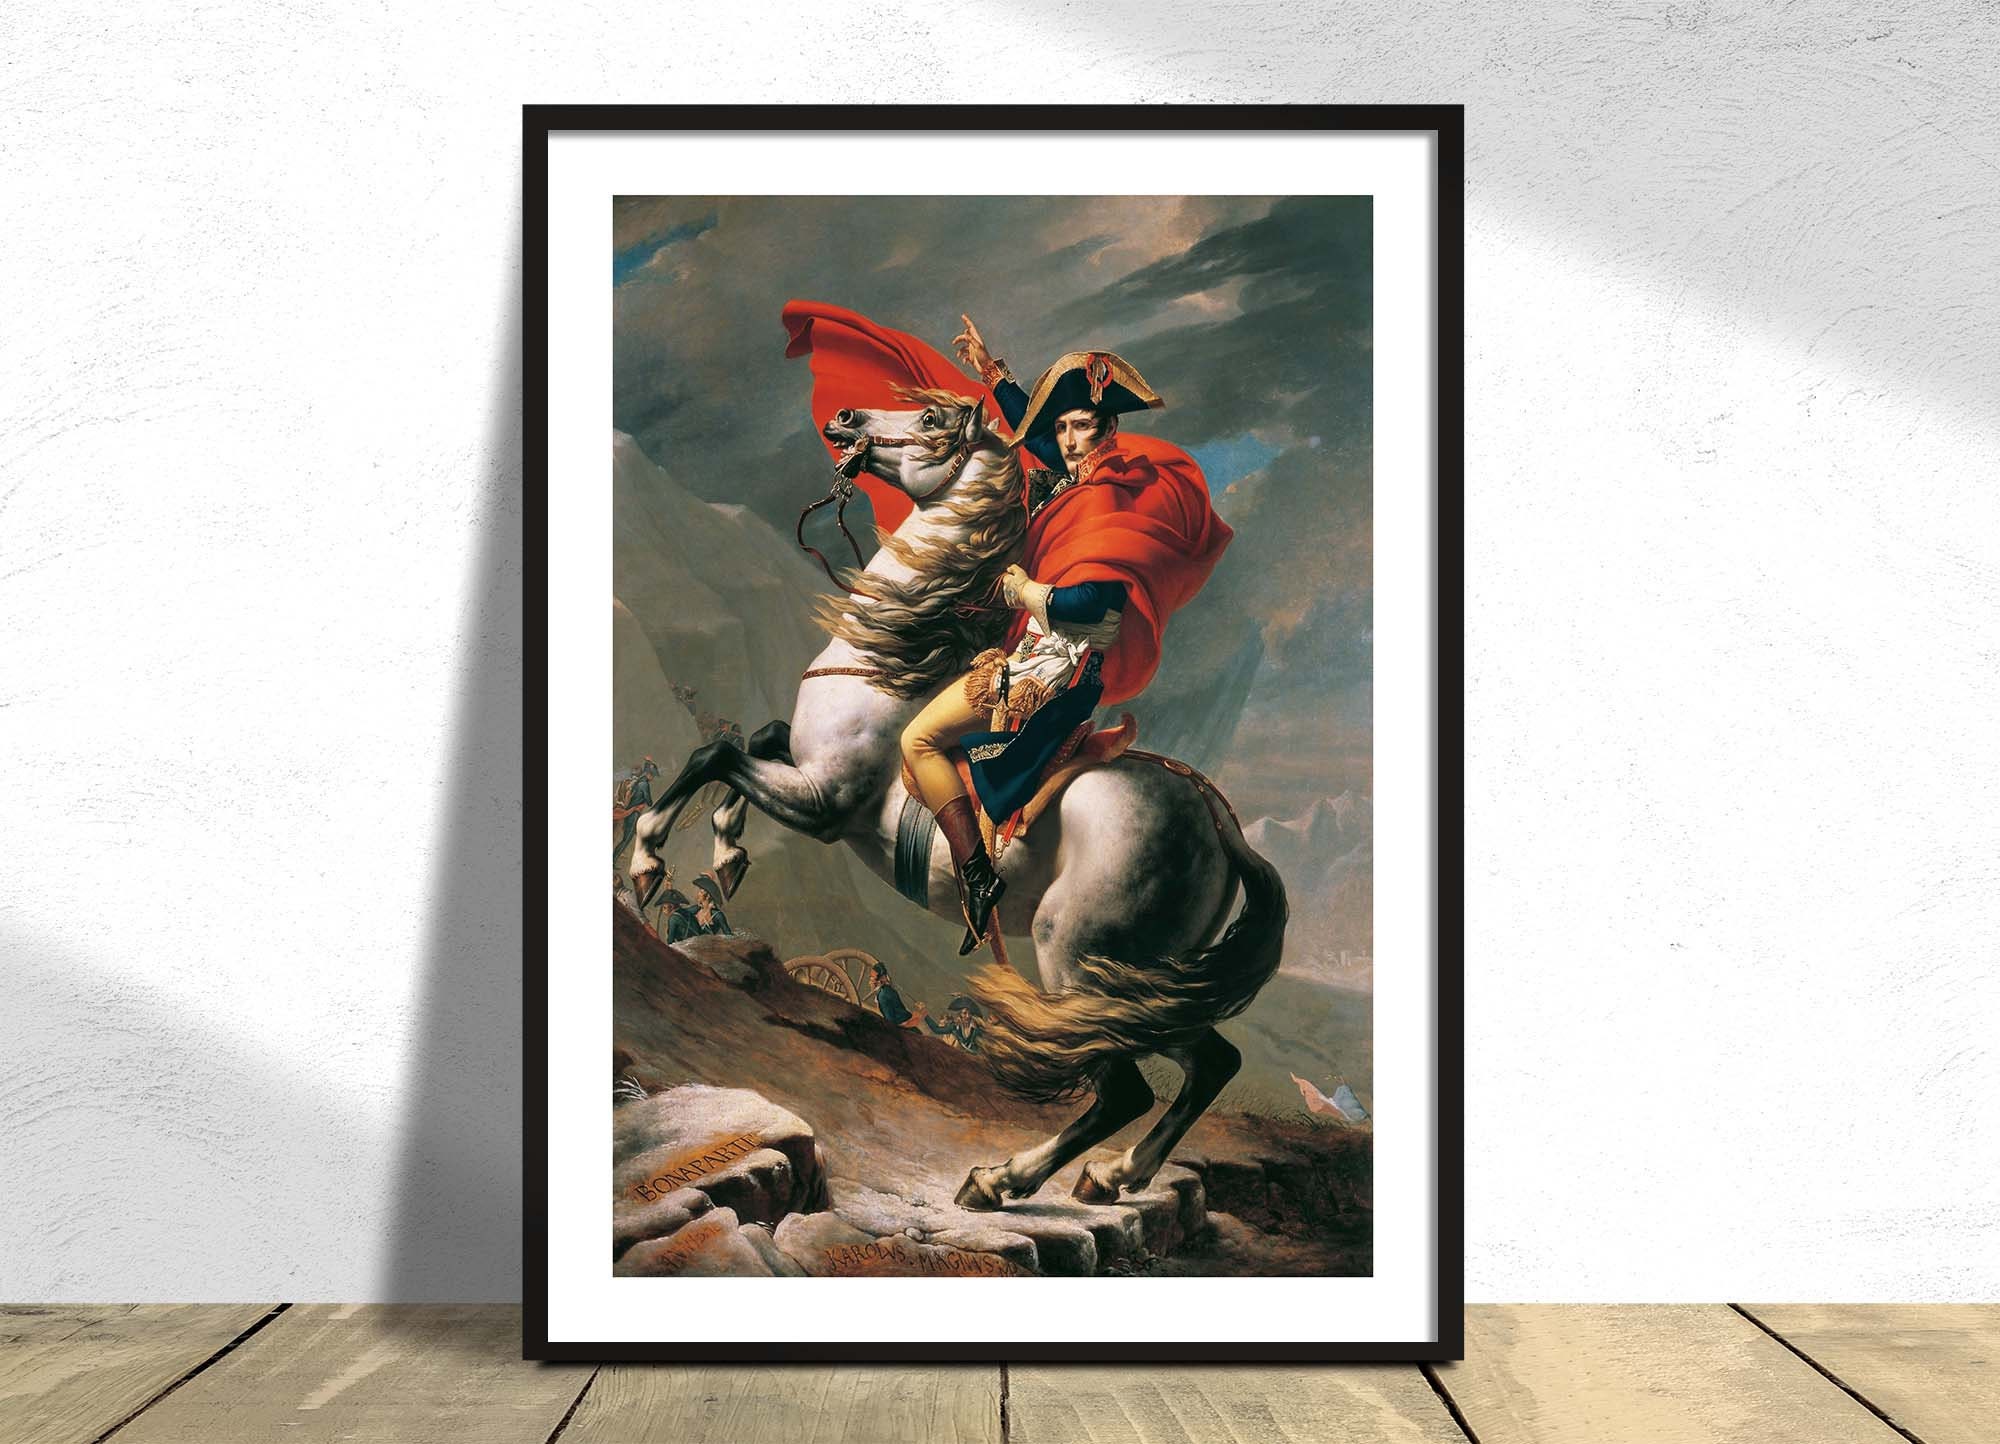 Napoleon Bonaparte Crossing the Alps With His Army White Horse Equestrian  by Jacques-louis David Repro Matte Paper or Canvas FREE S/H in USA 